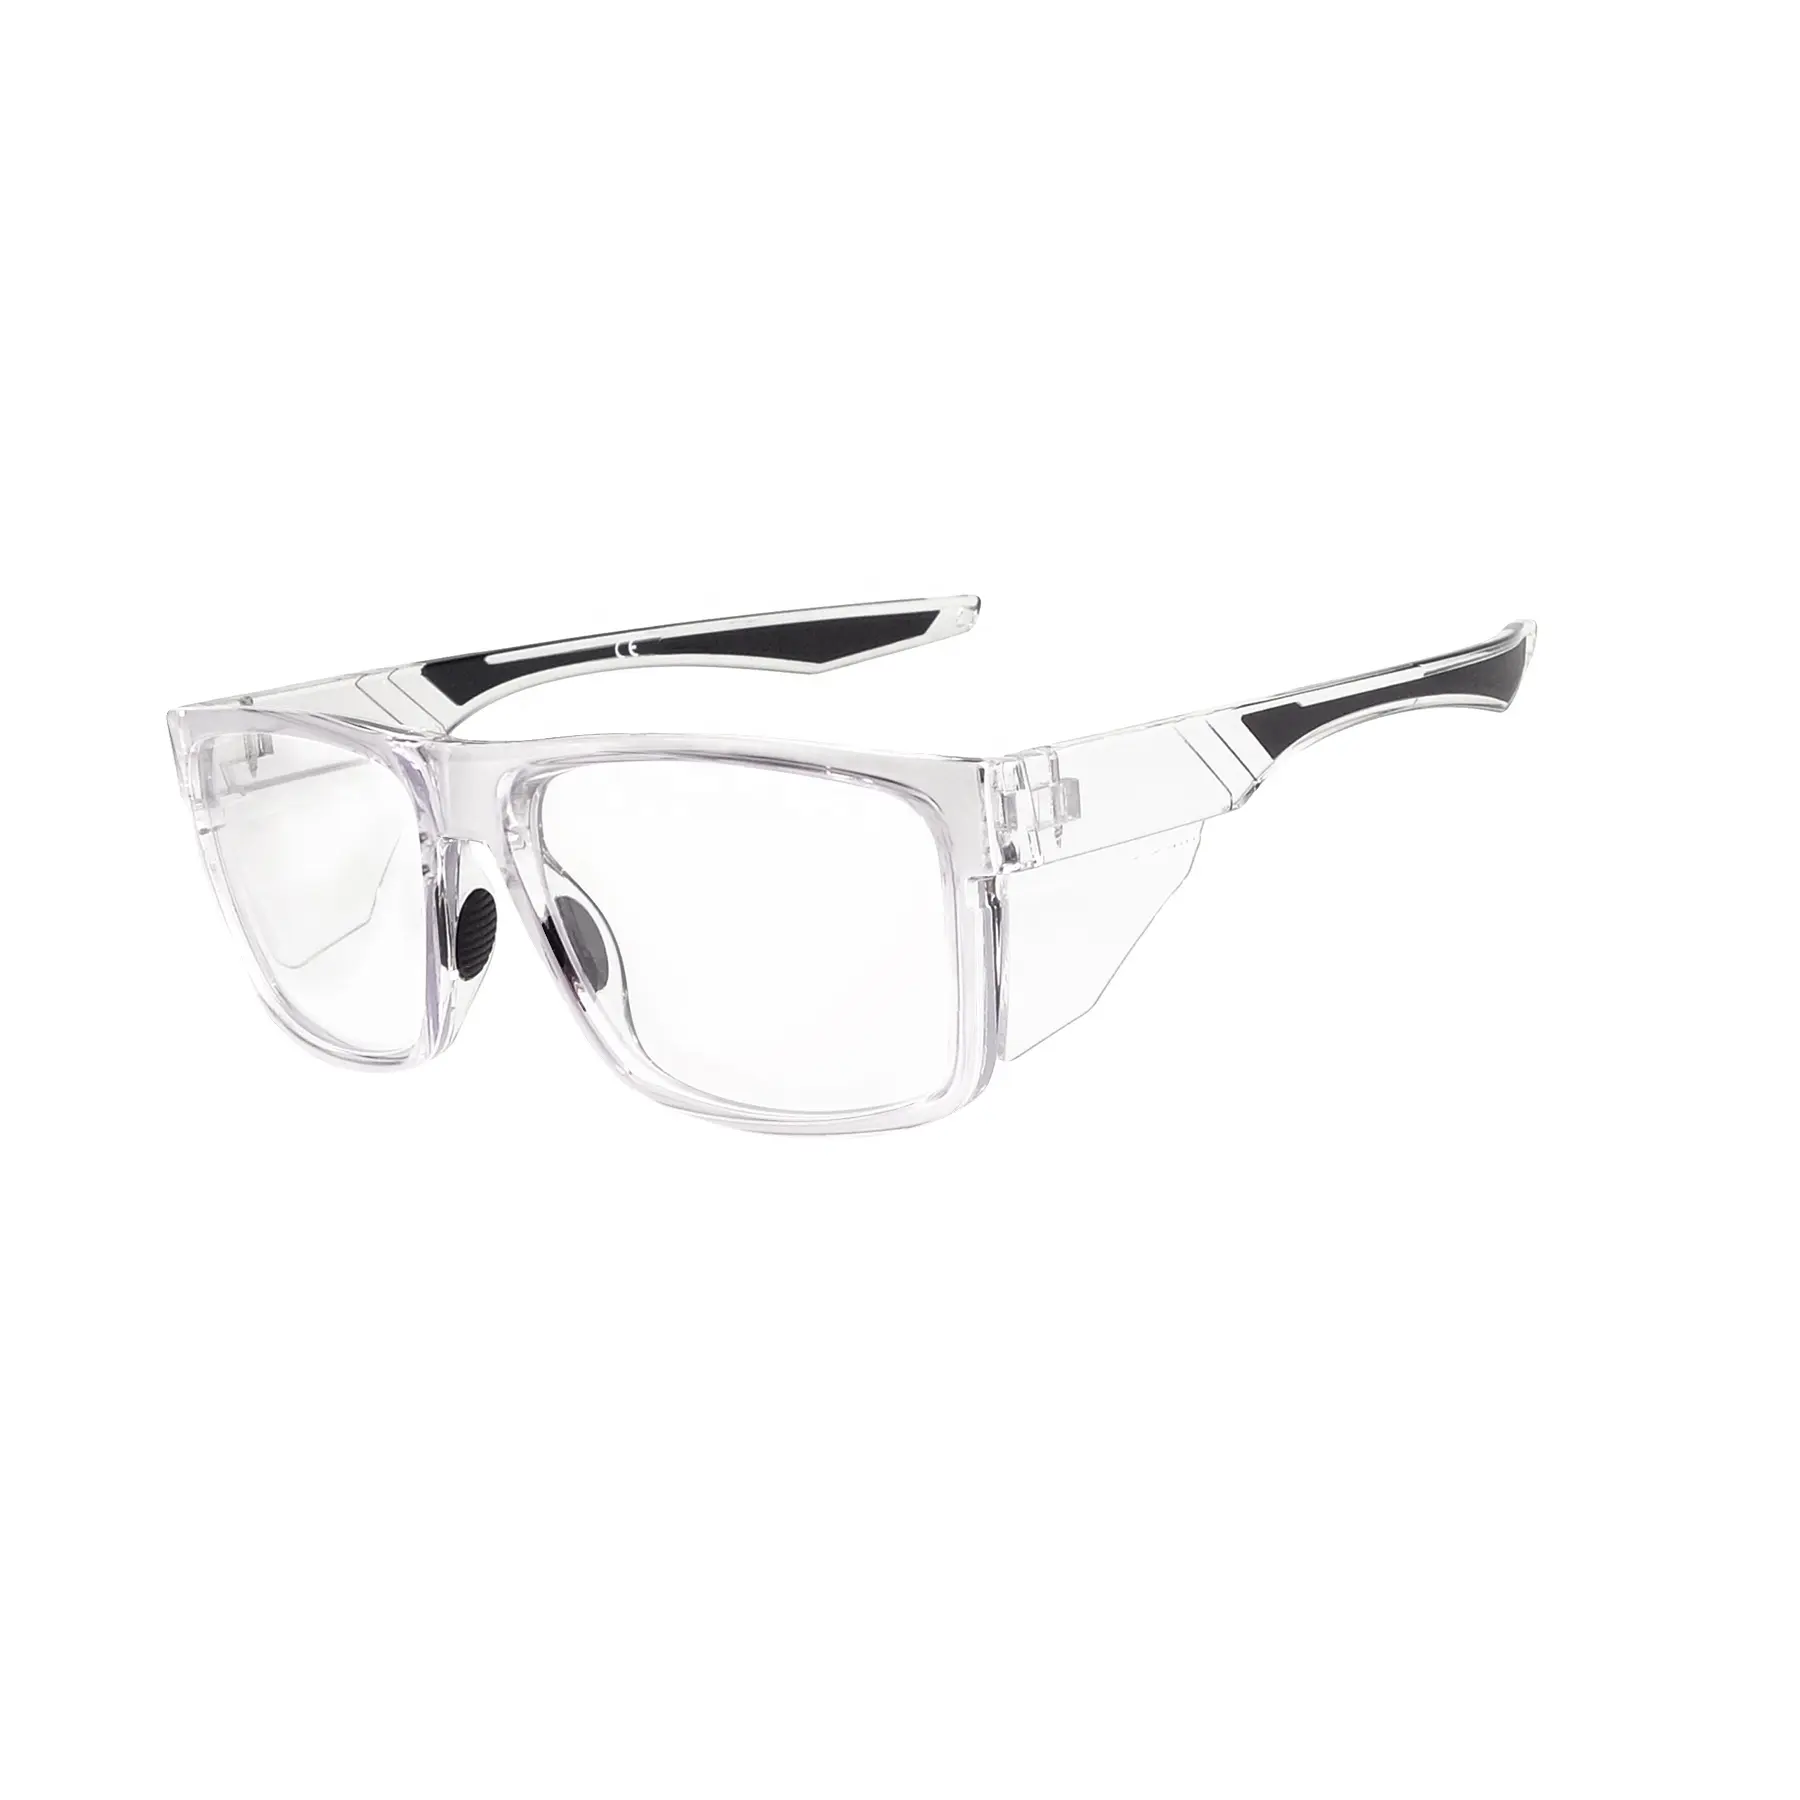 Customized ANSI Z87.1 certified high impact Optical safety glasses with rubber nose pad and tips